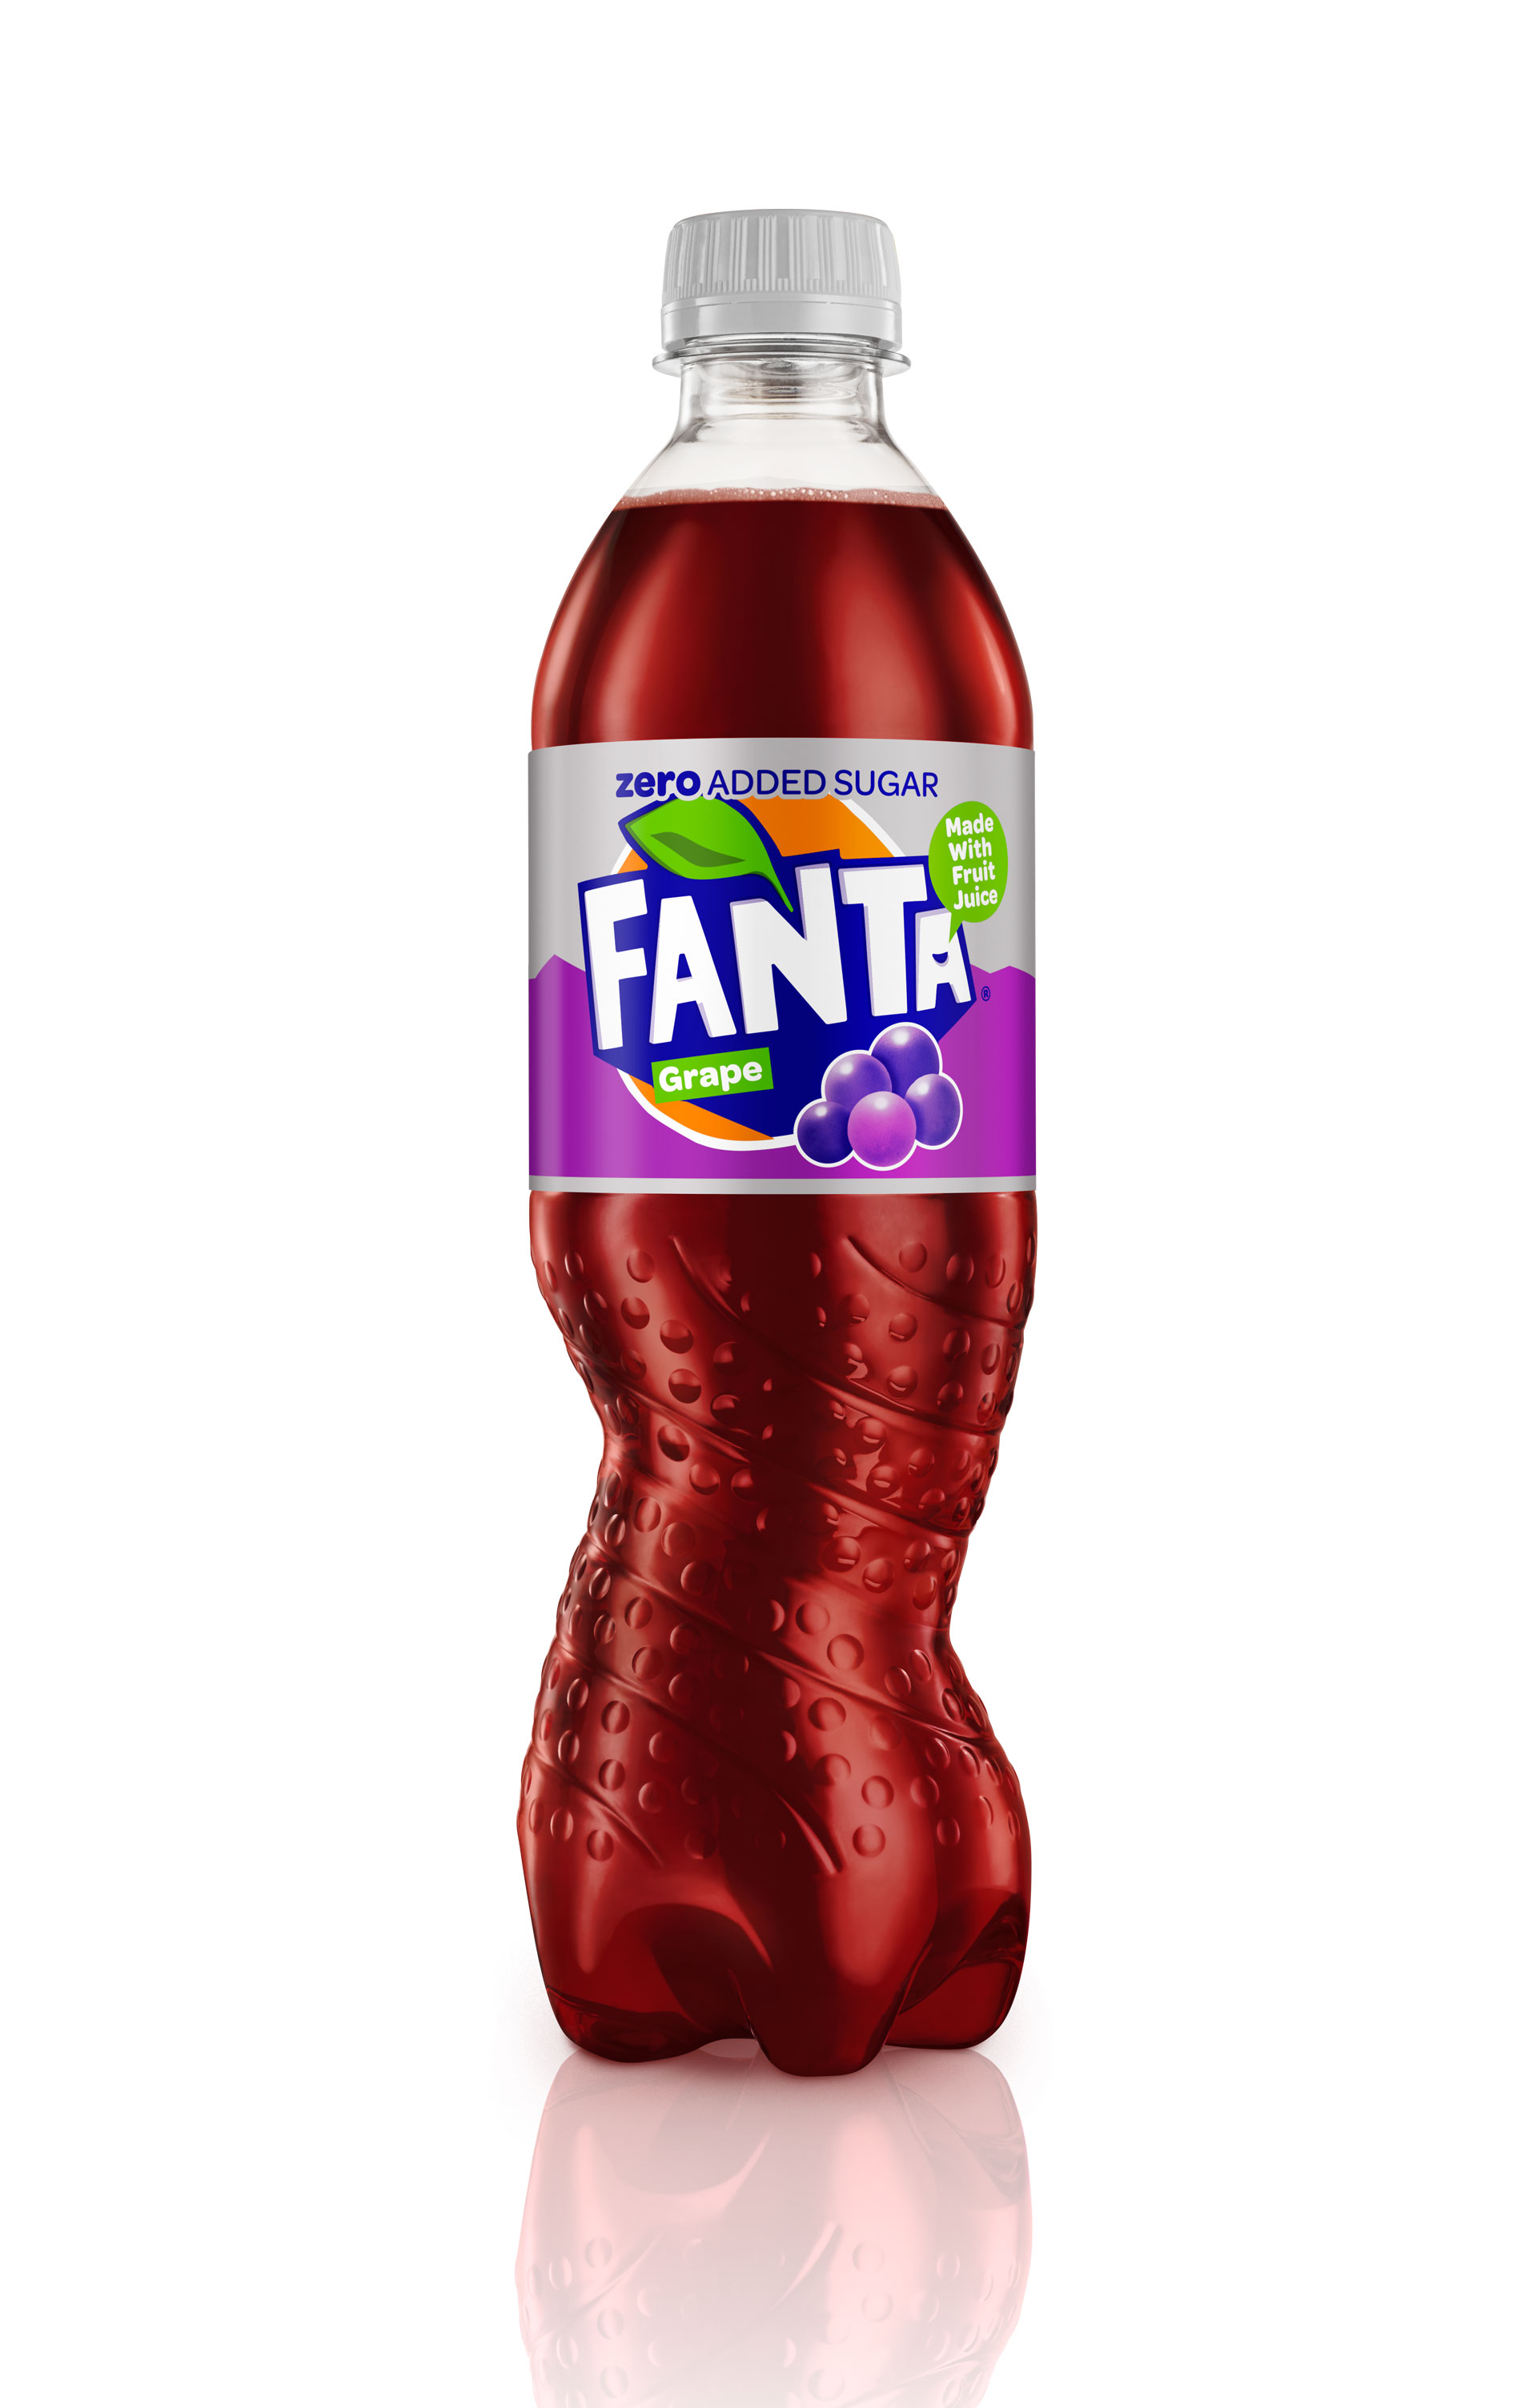 Fanta Launches Fanta Grape Zero Flavour In The Uk For The First Time photo